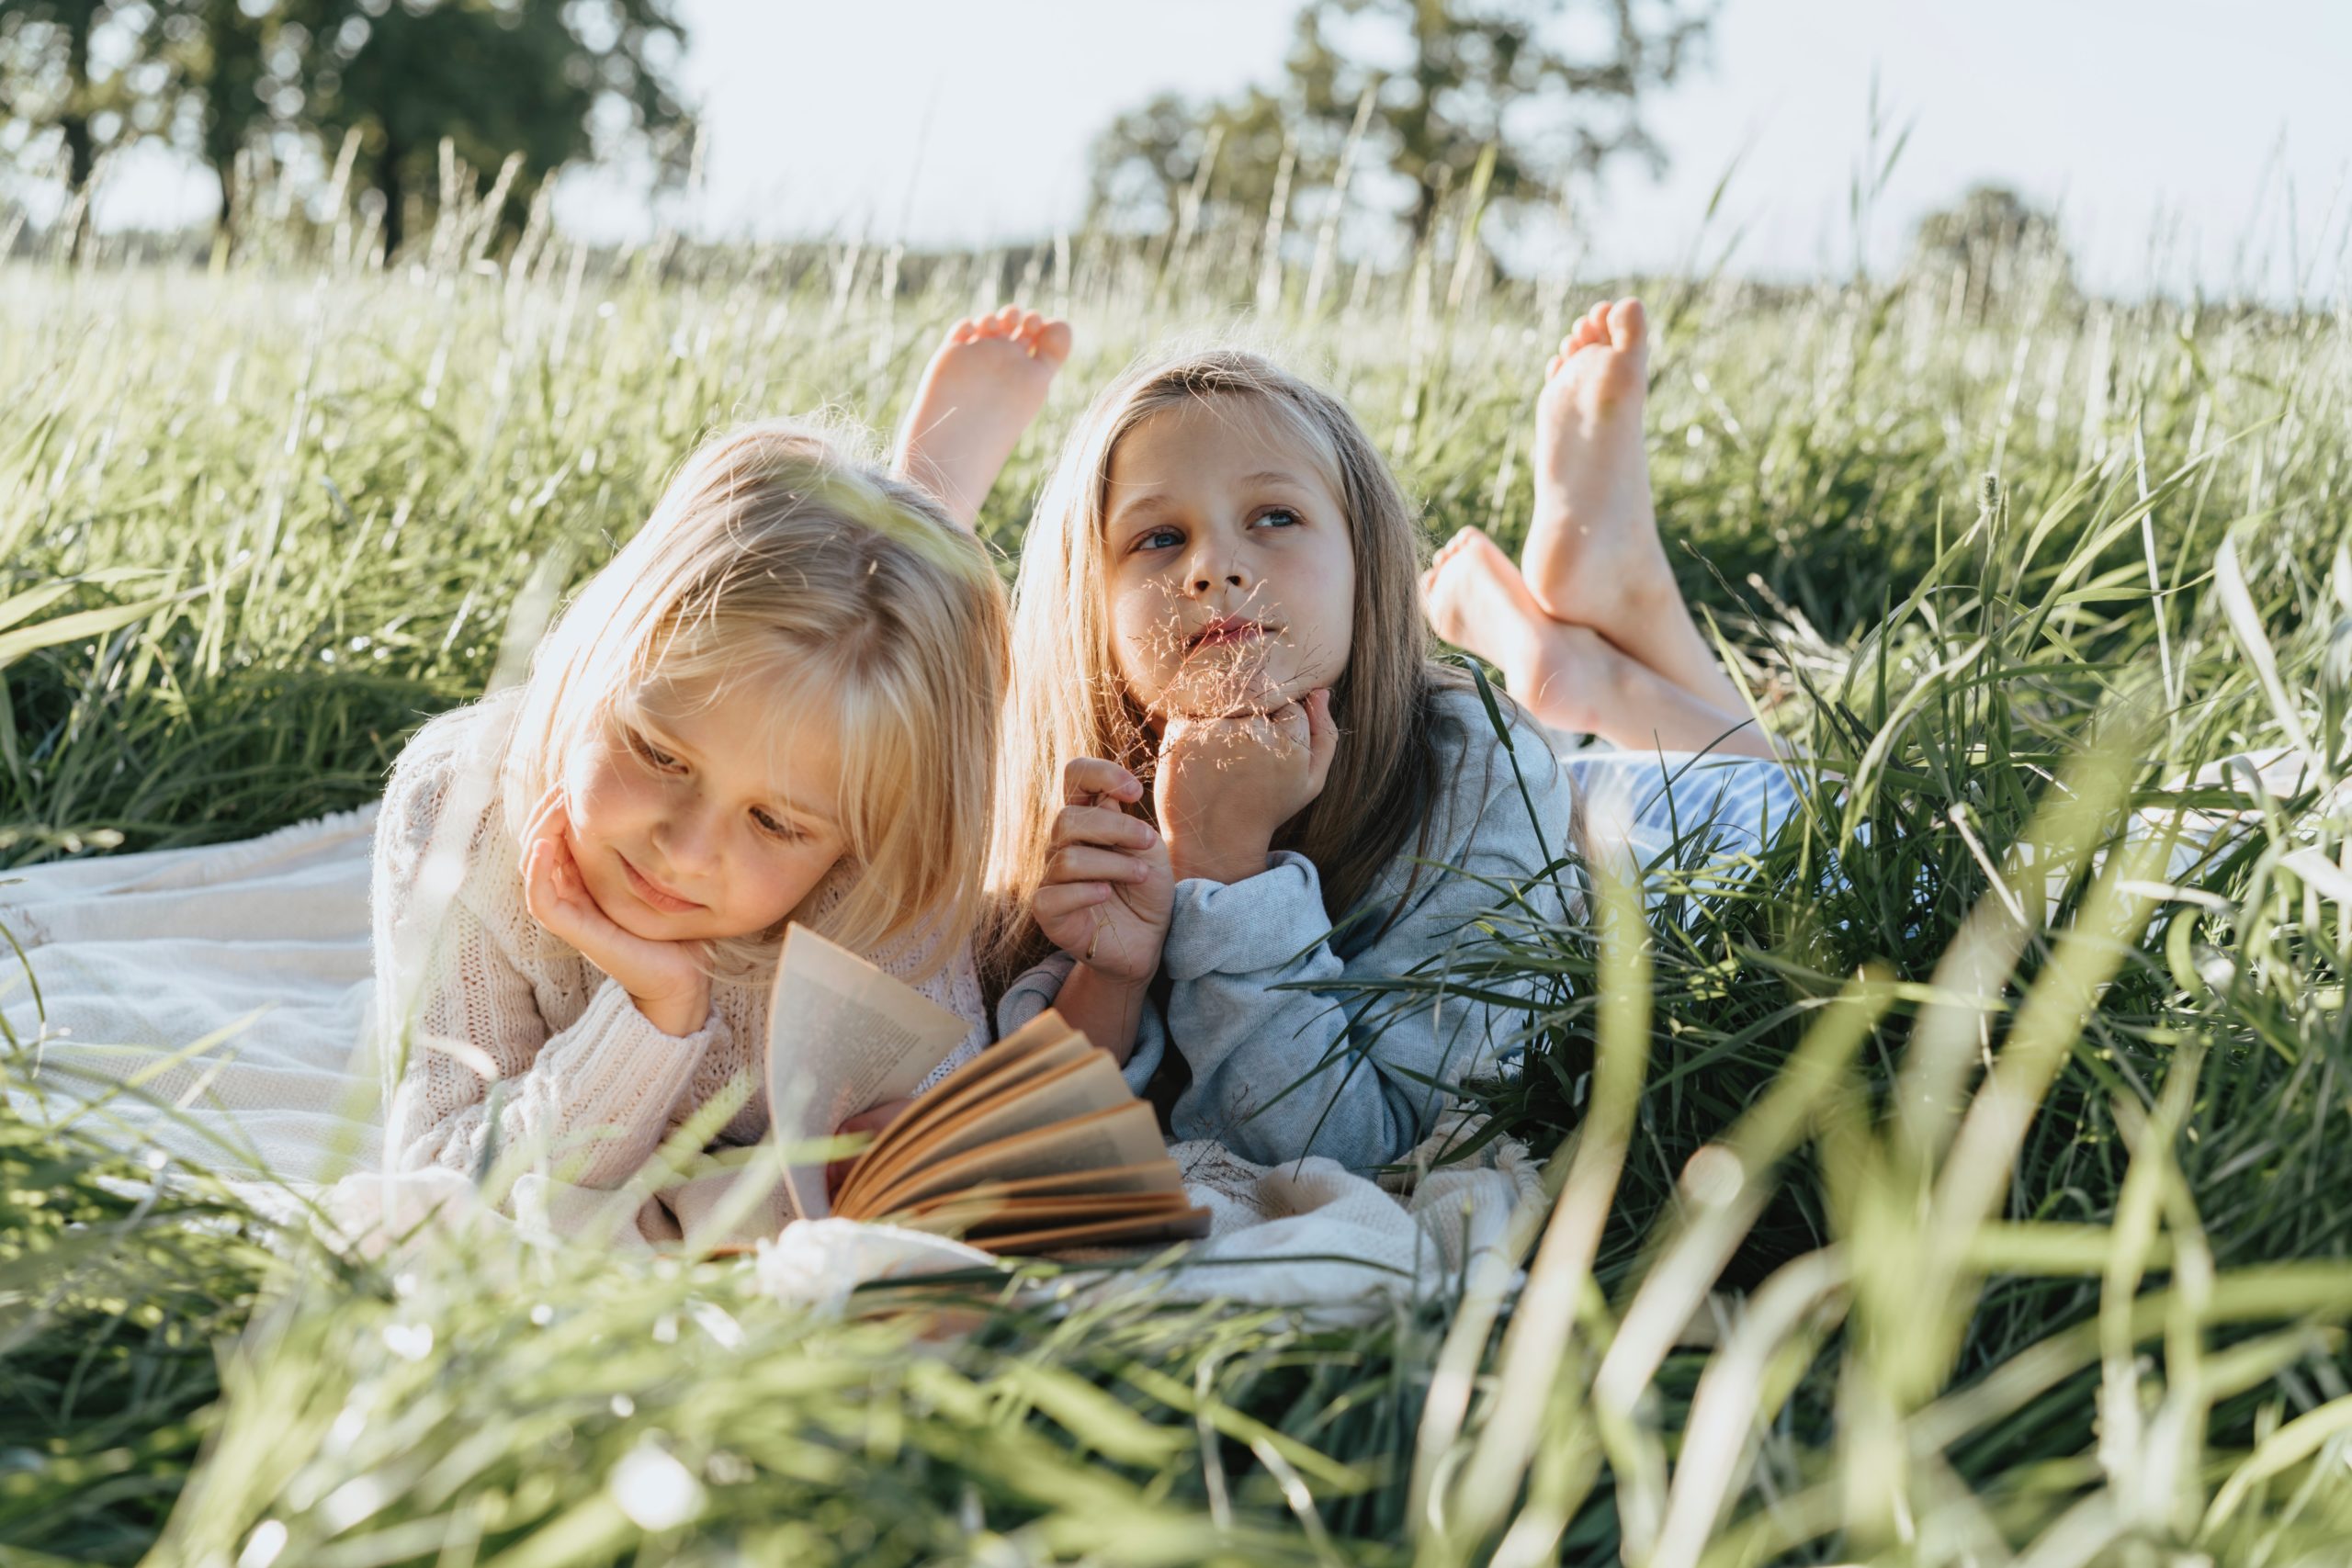 Two young sisters in grass